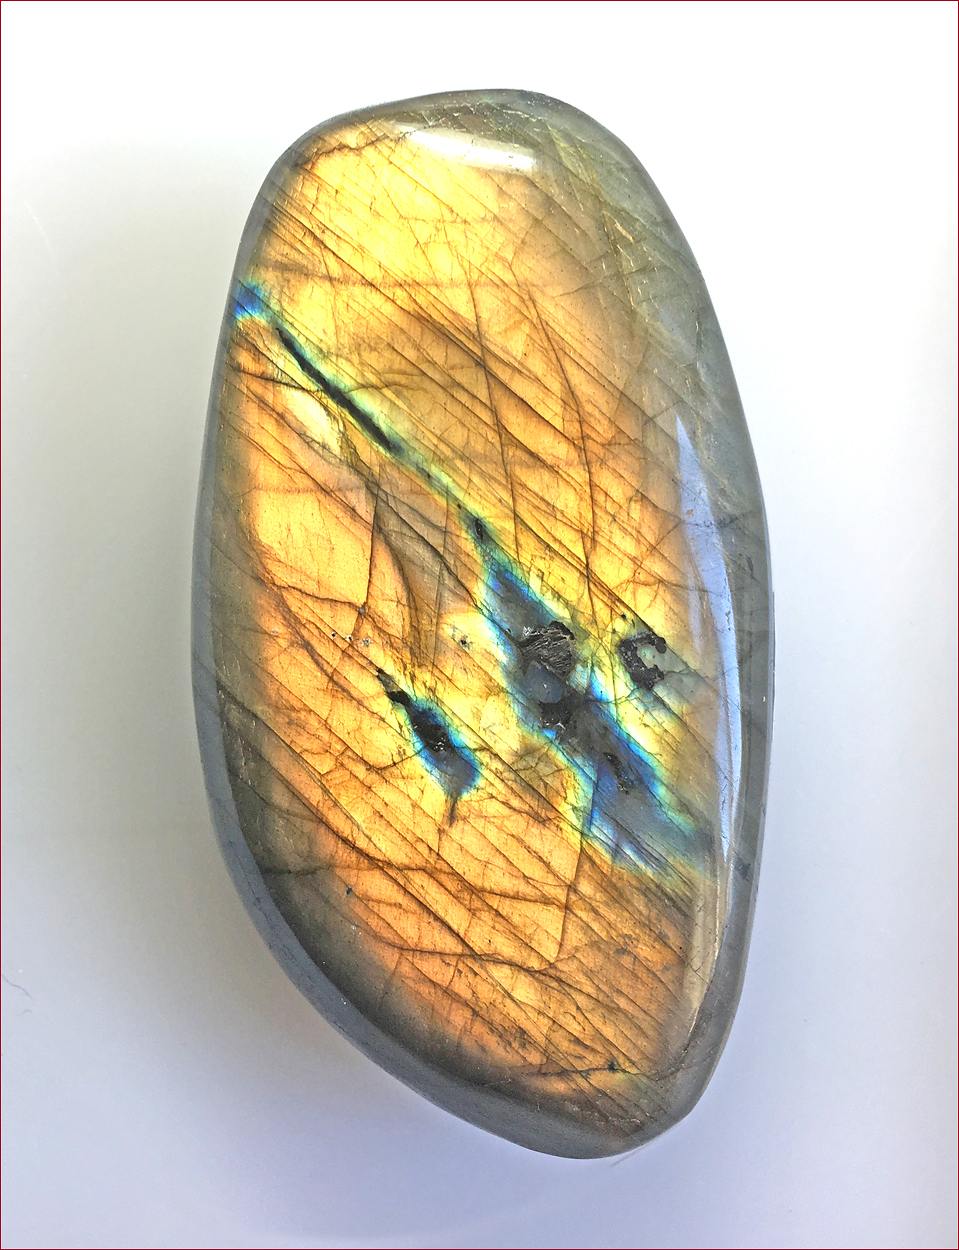 Superb double-sided piece of polished Labradorite